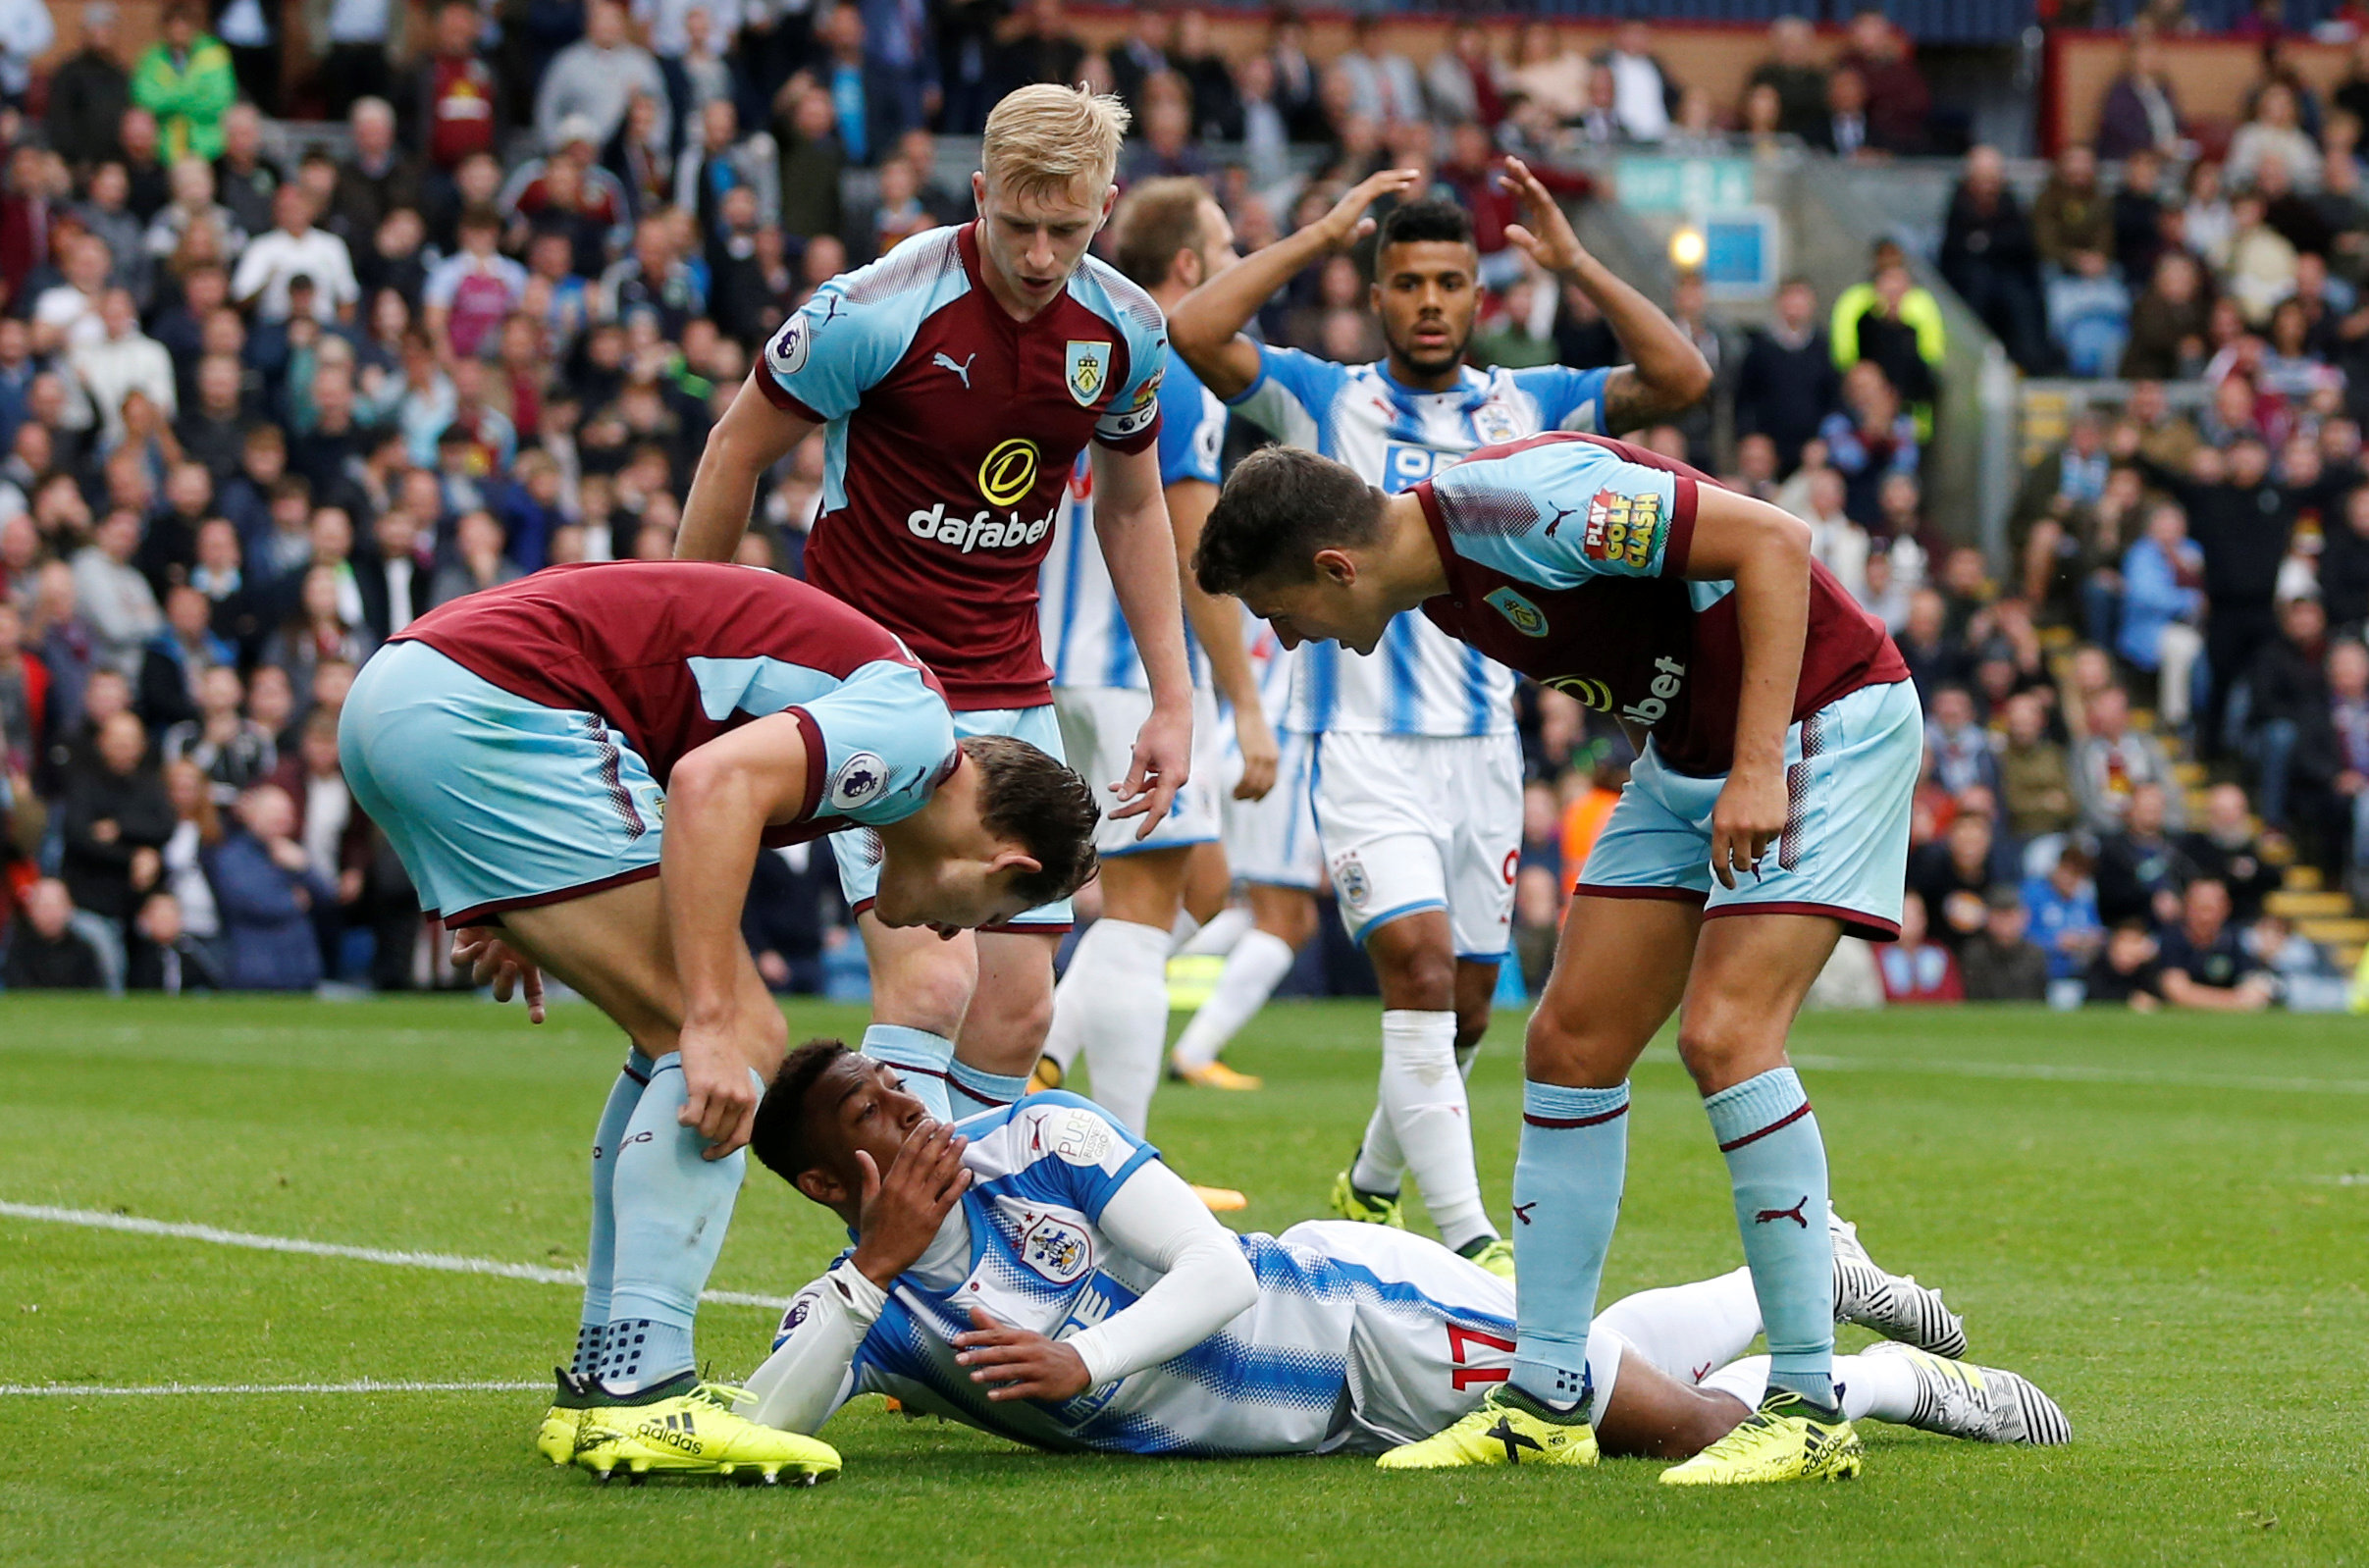 Football: Burnley and Huddersfield share a scrappy point